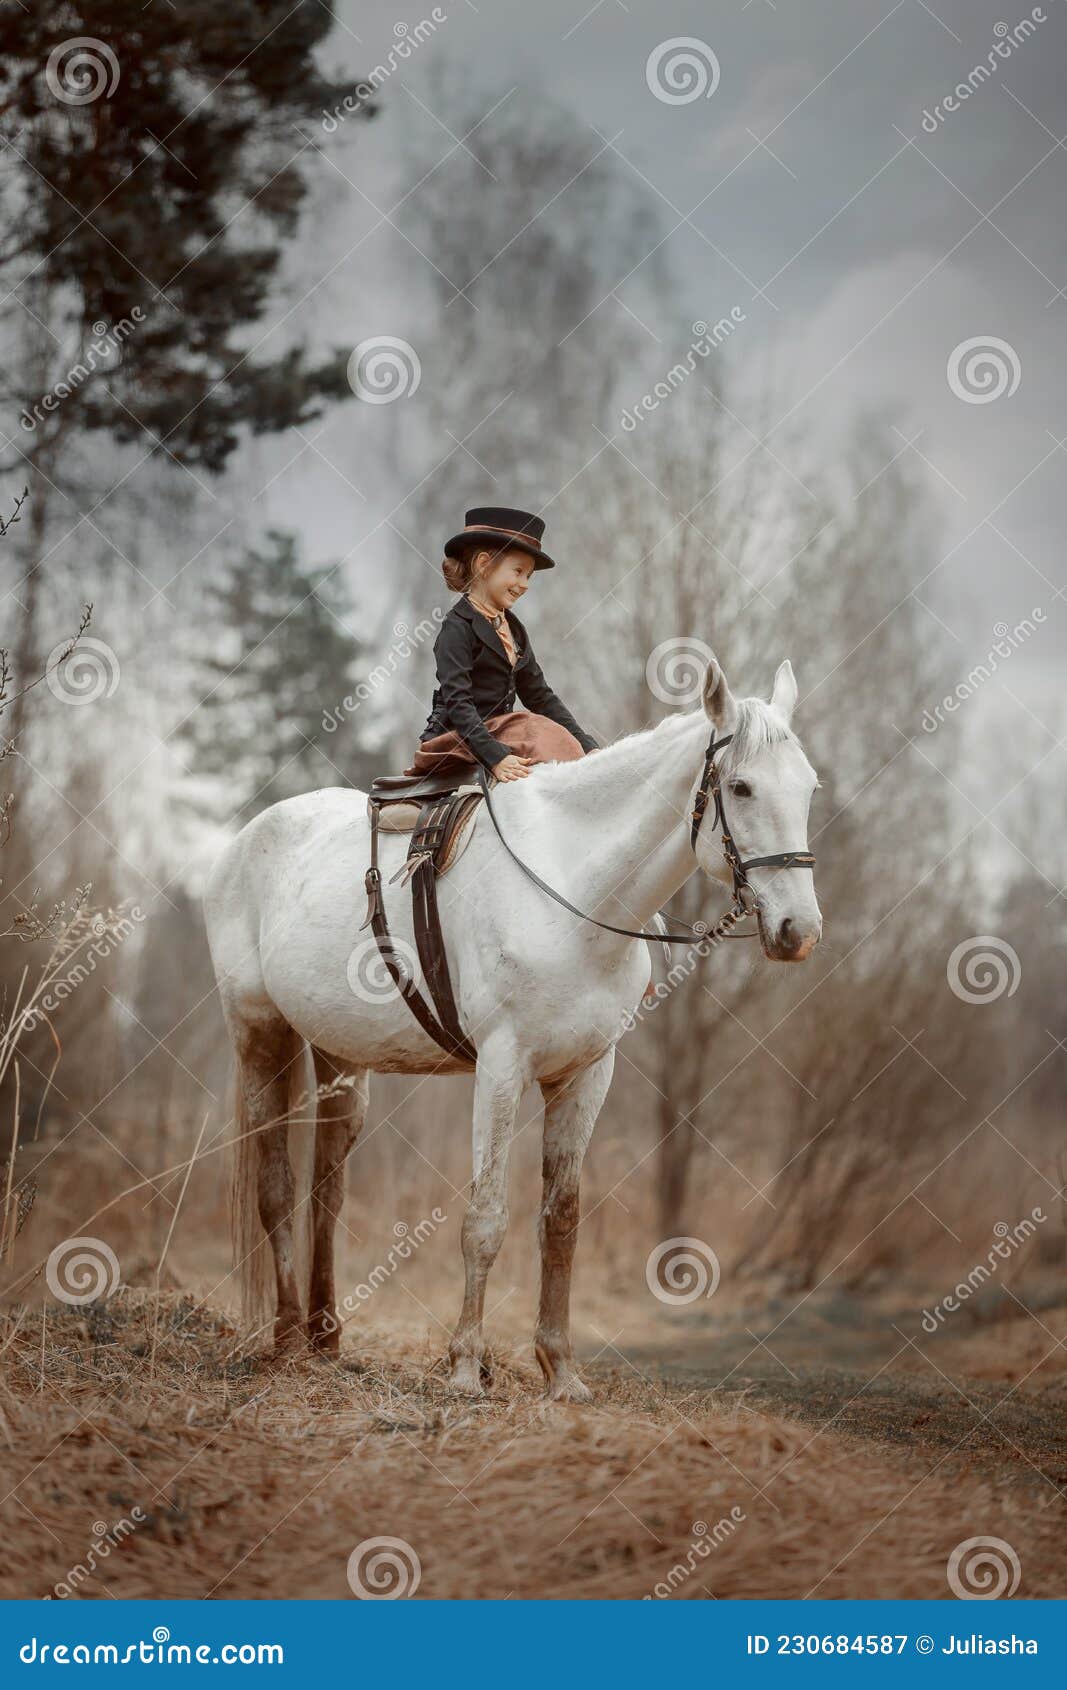 little girl in riding habit with horse and vizsla